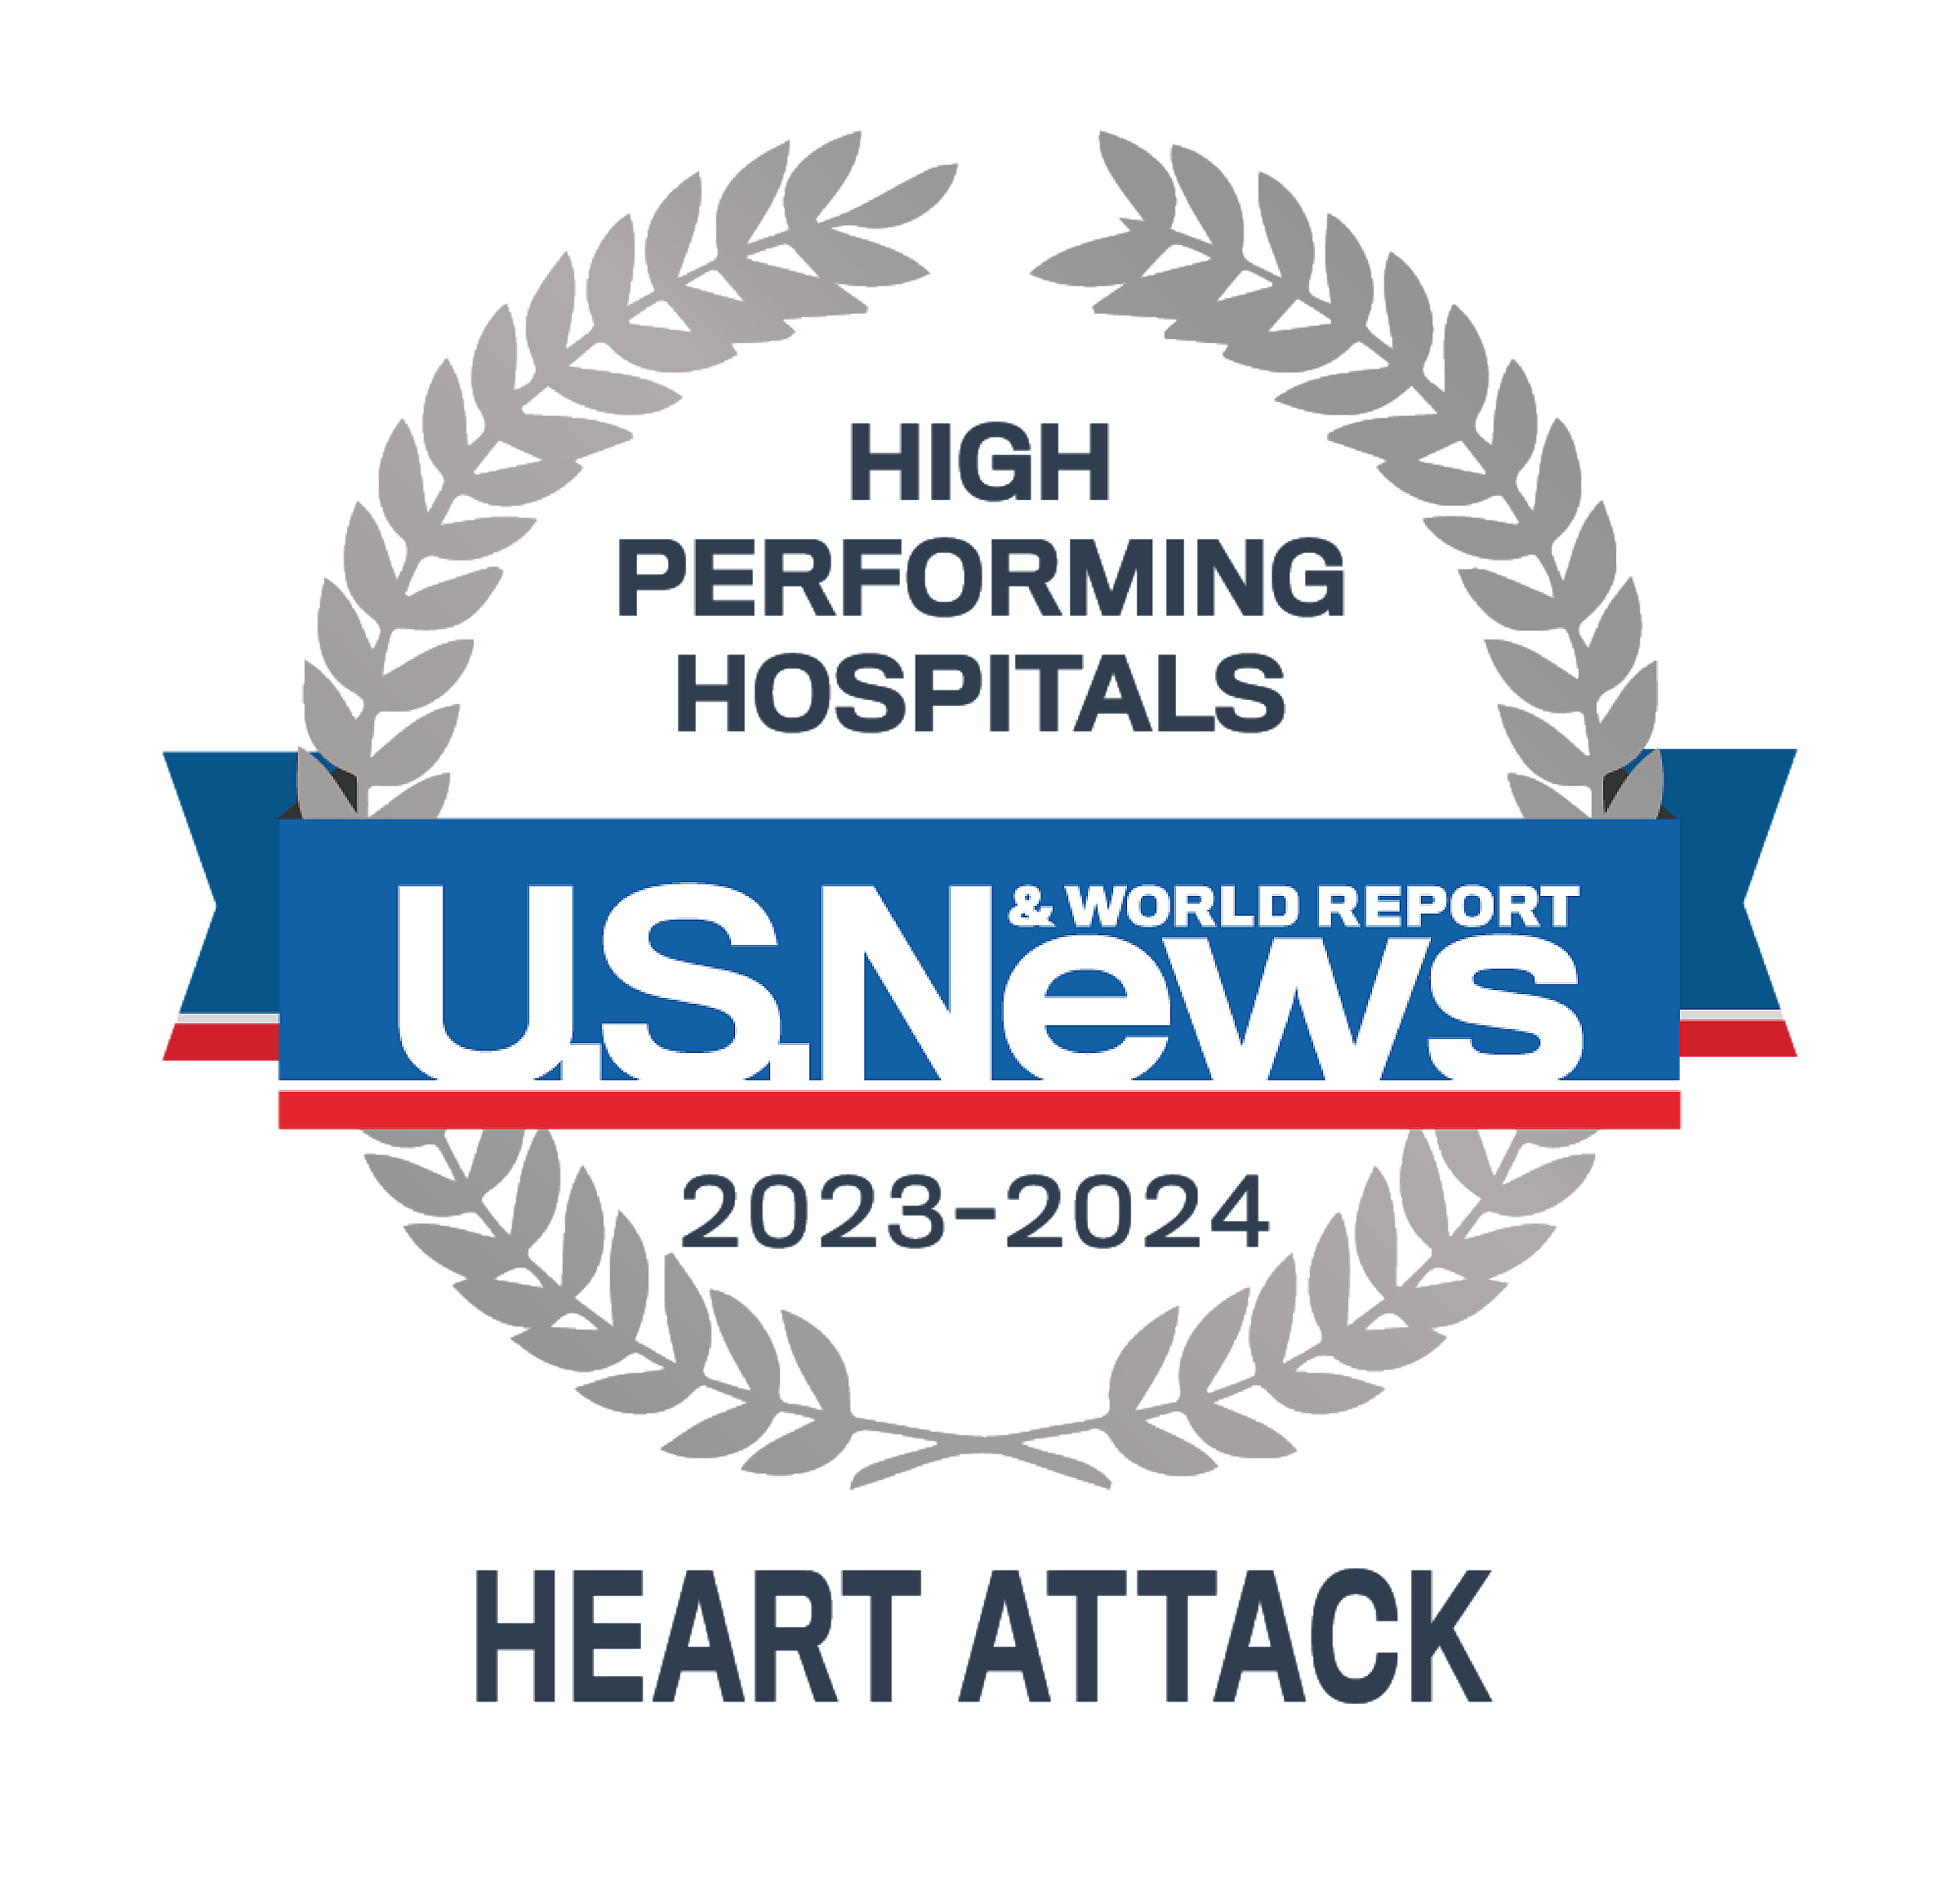 US News and World Report Heart Attack High Performance Treatment 2023-2024